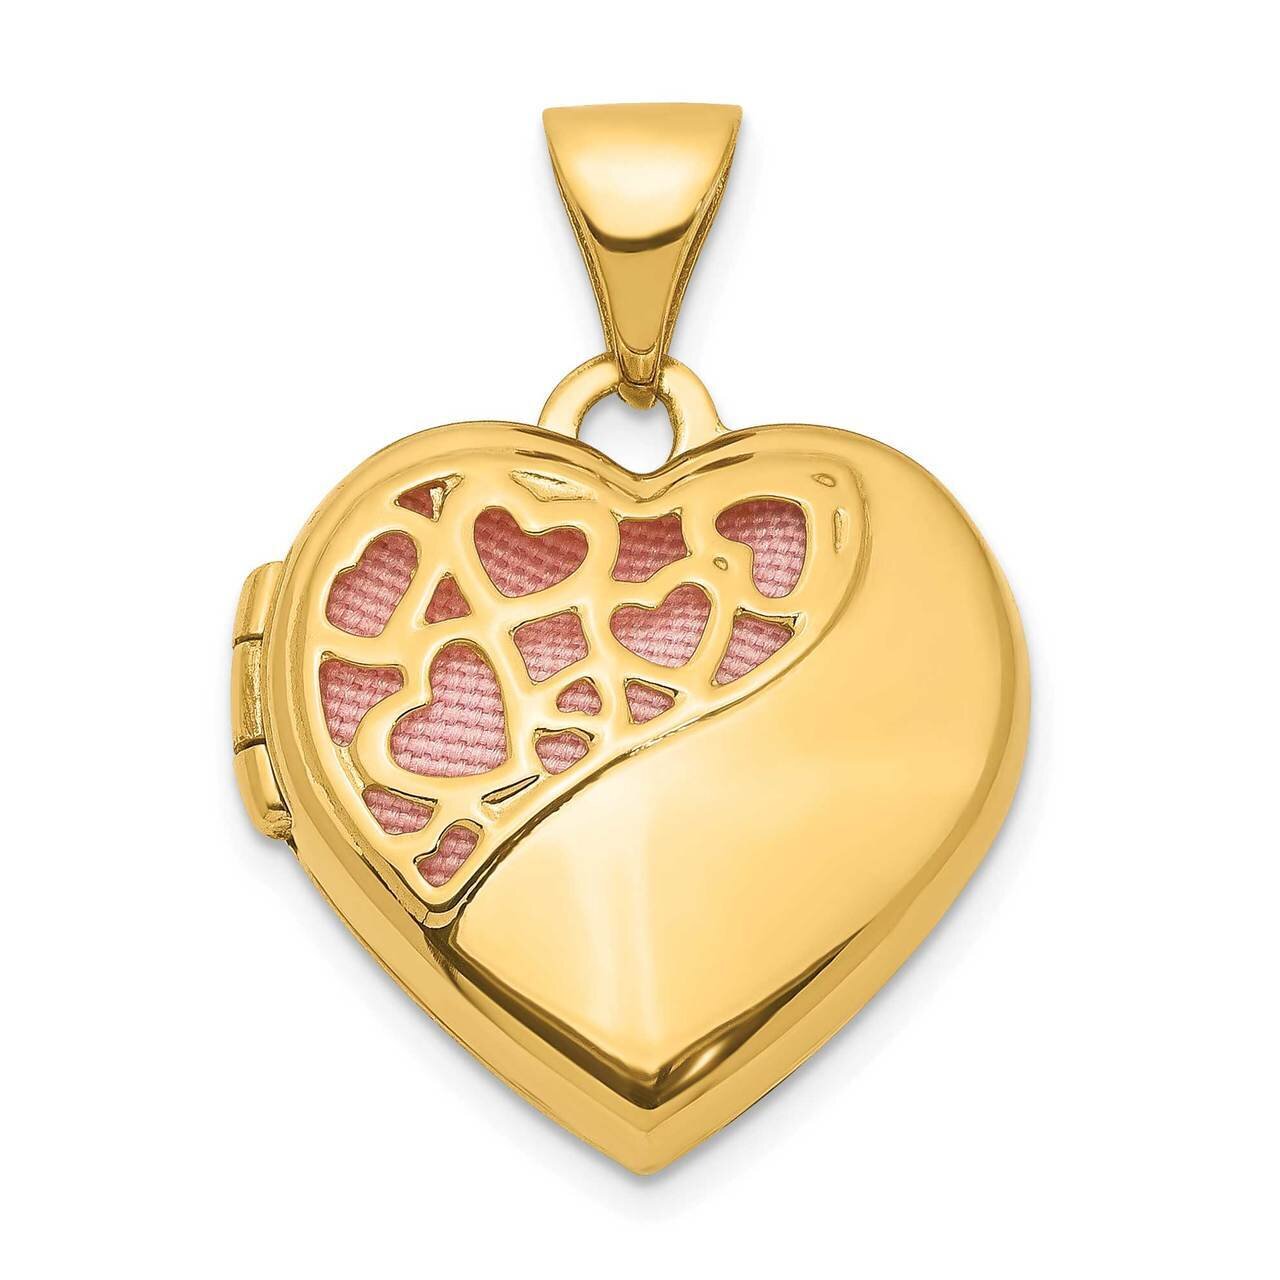 Hearts Cut Out 16mm with Pink Fabric Diamond Heart Locket Pendant 14k Gold XL765